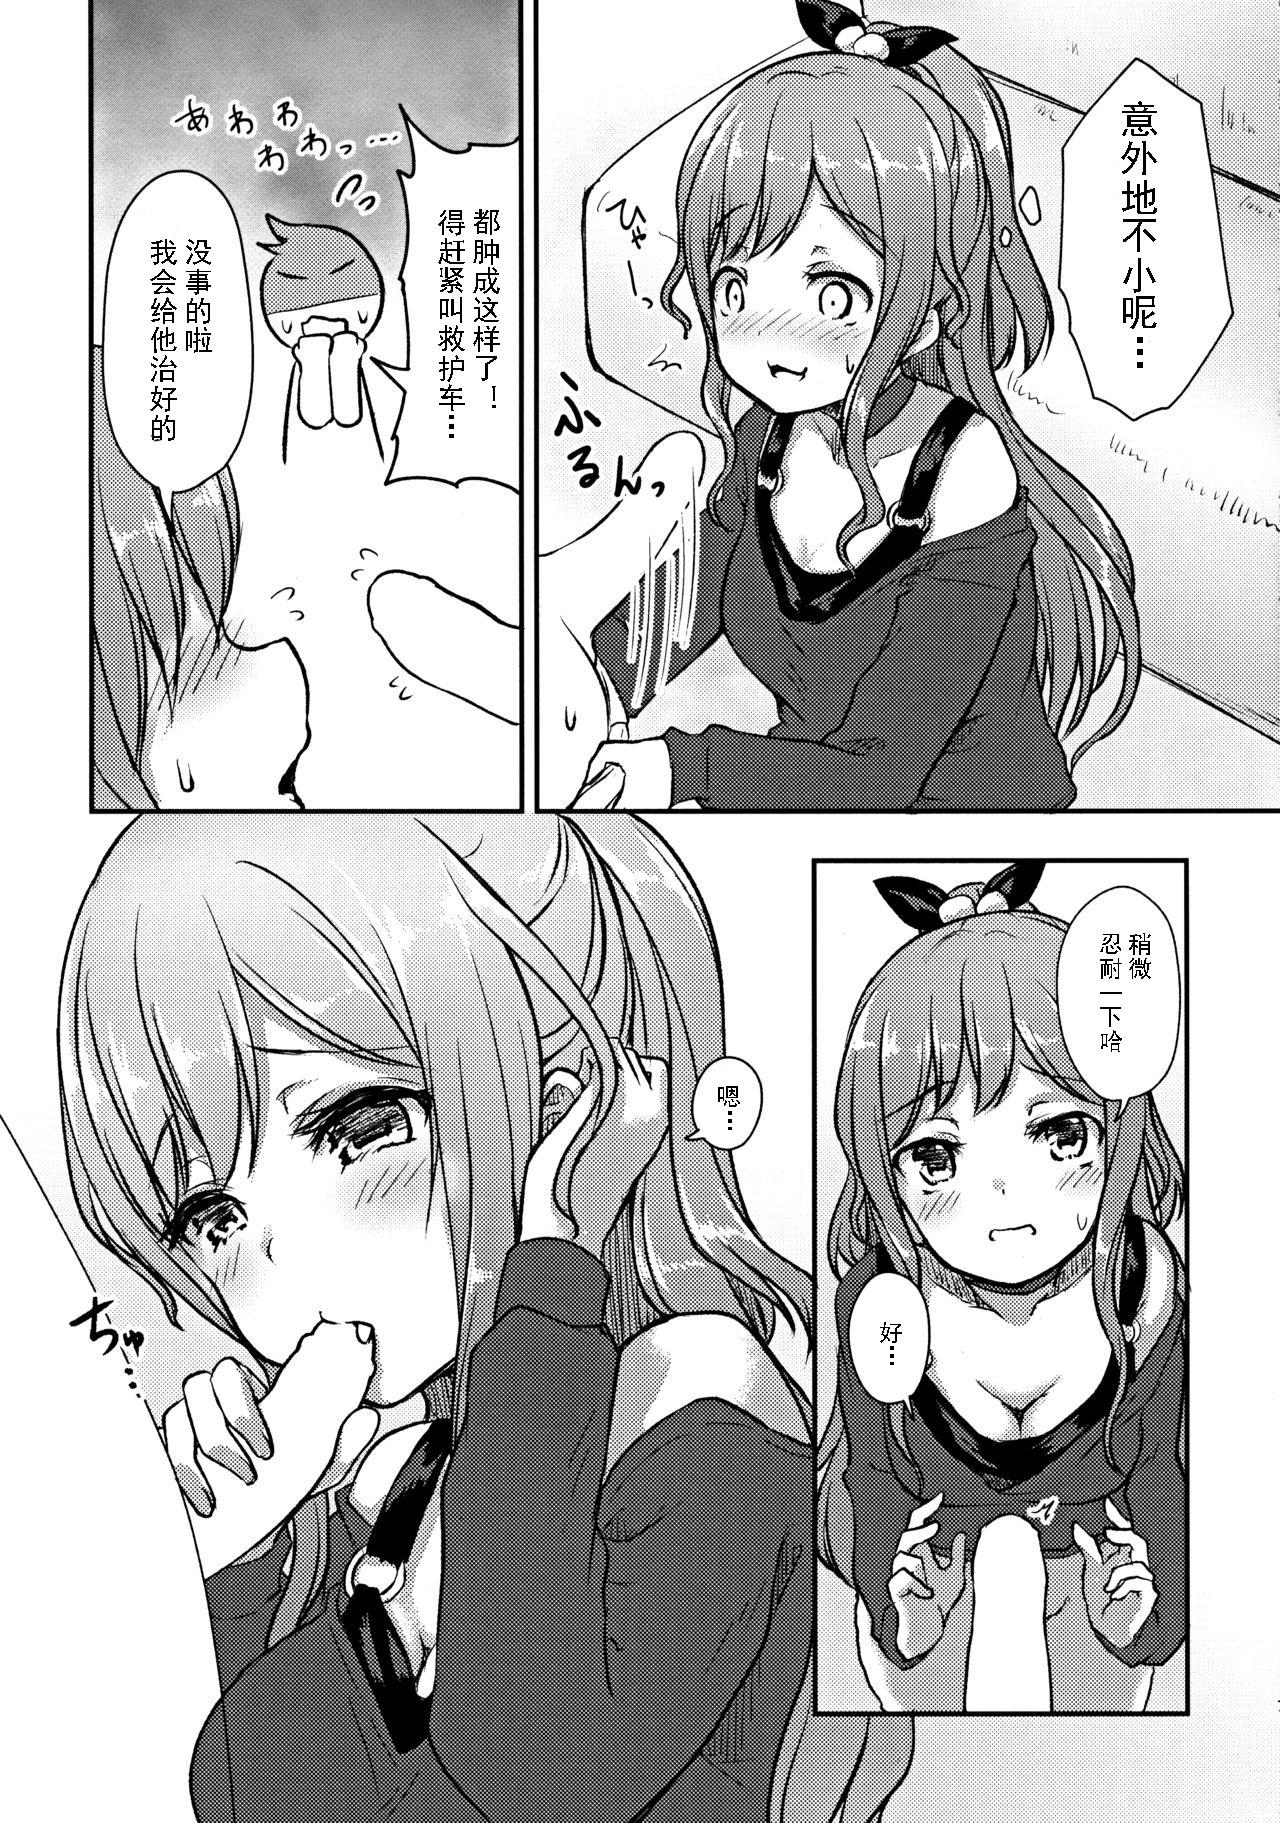 Selfie Hearty Hybrid Household - Bang dream Sola - Page 6